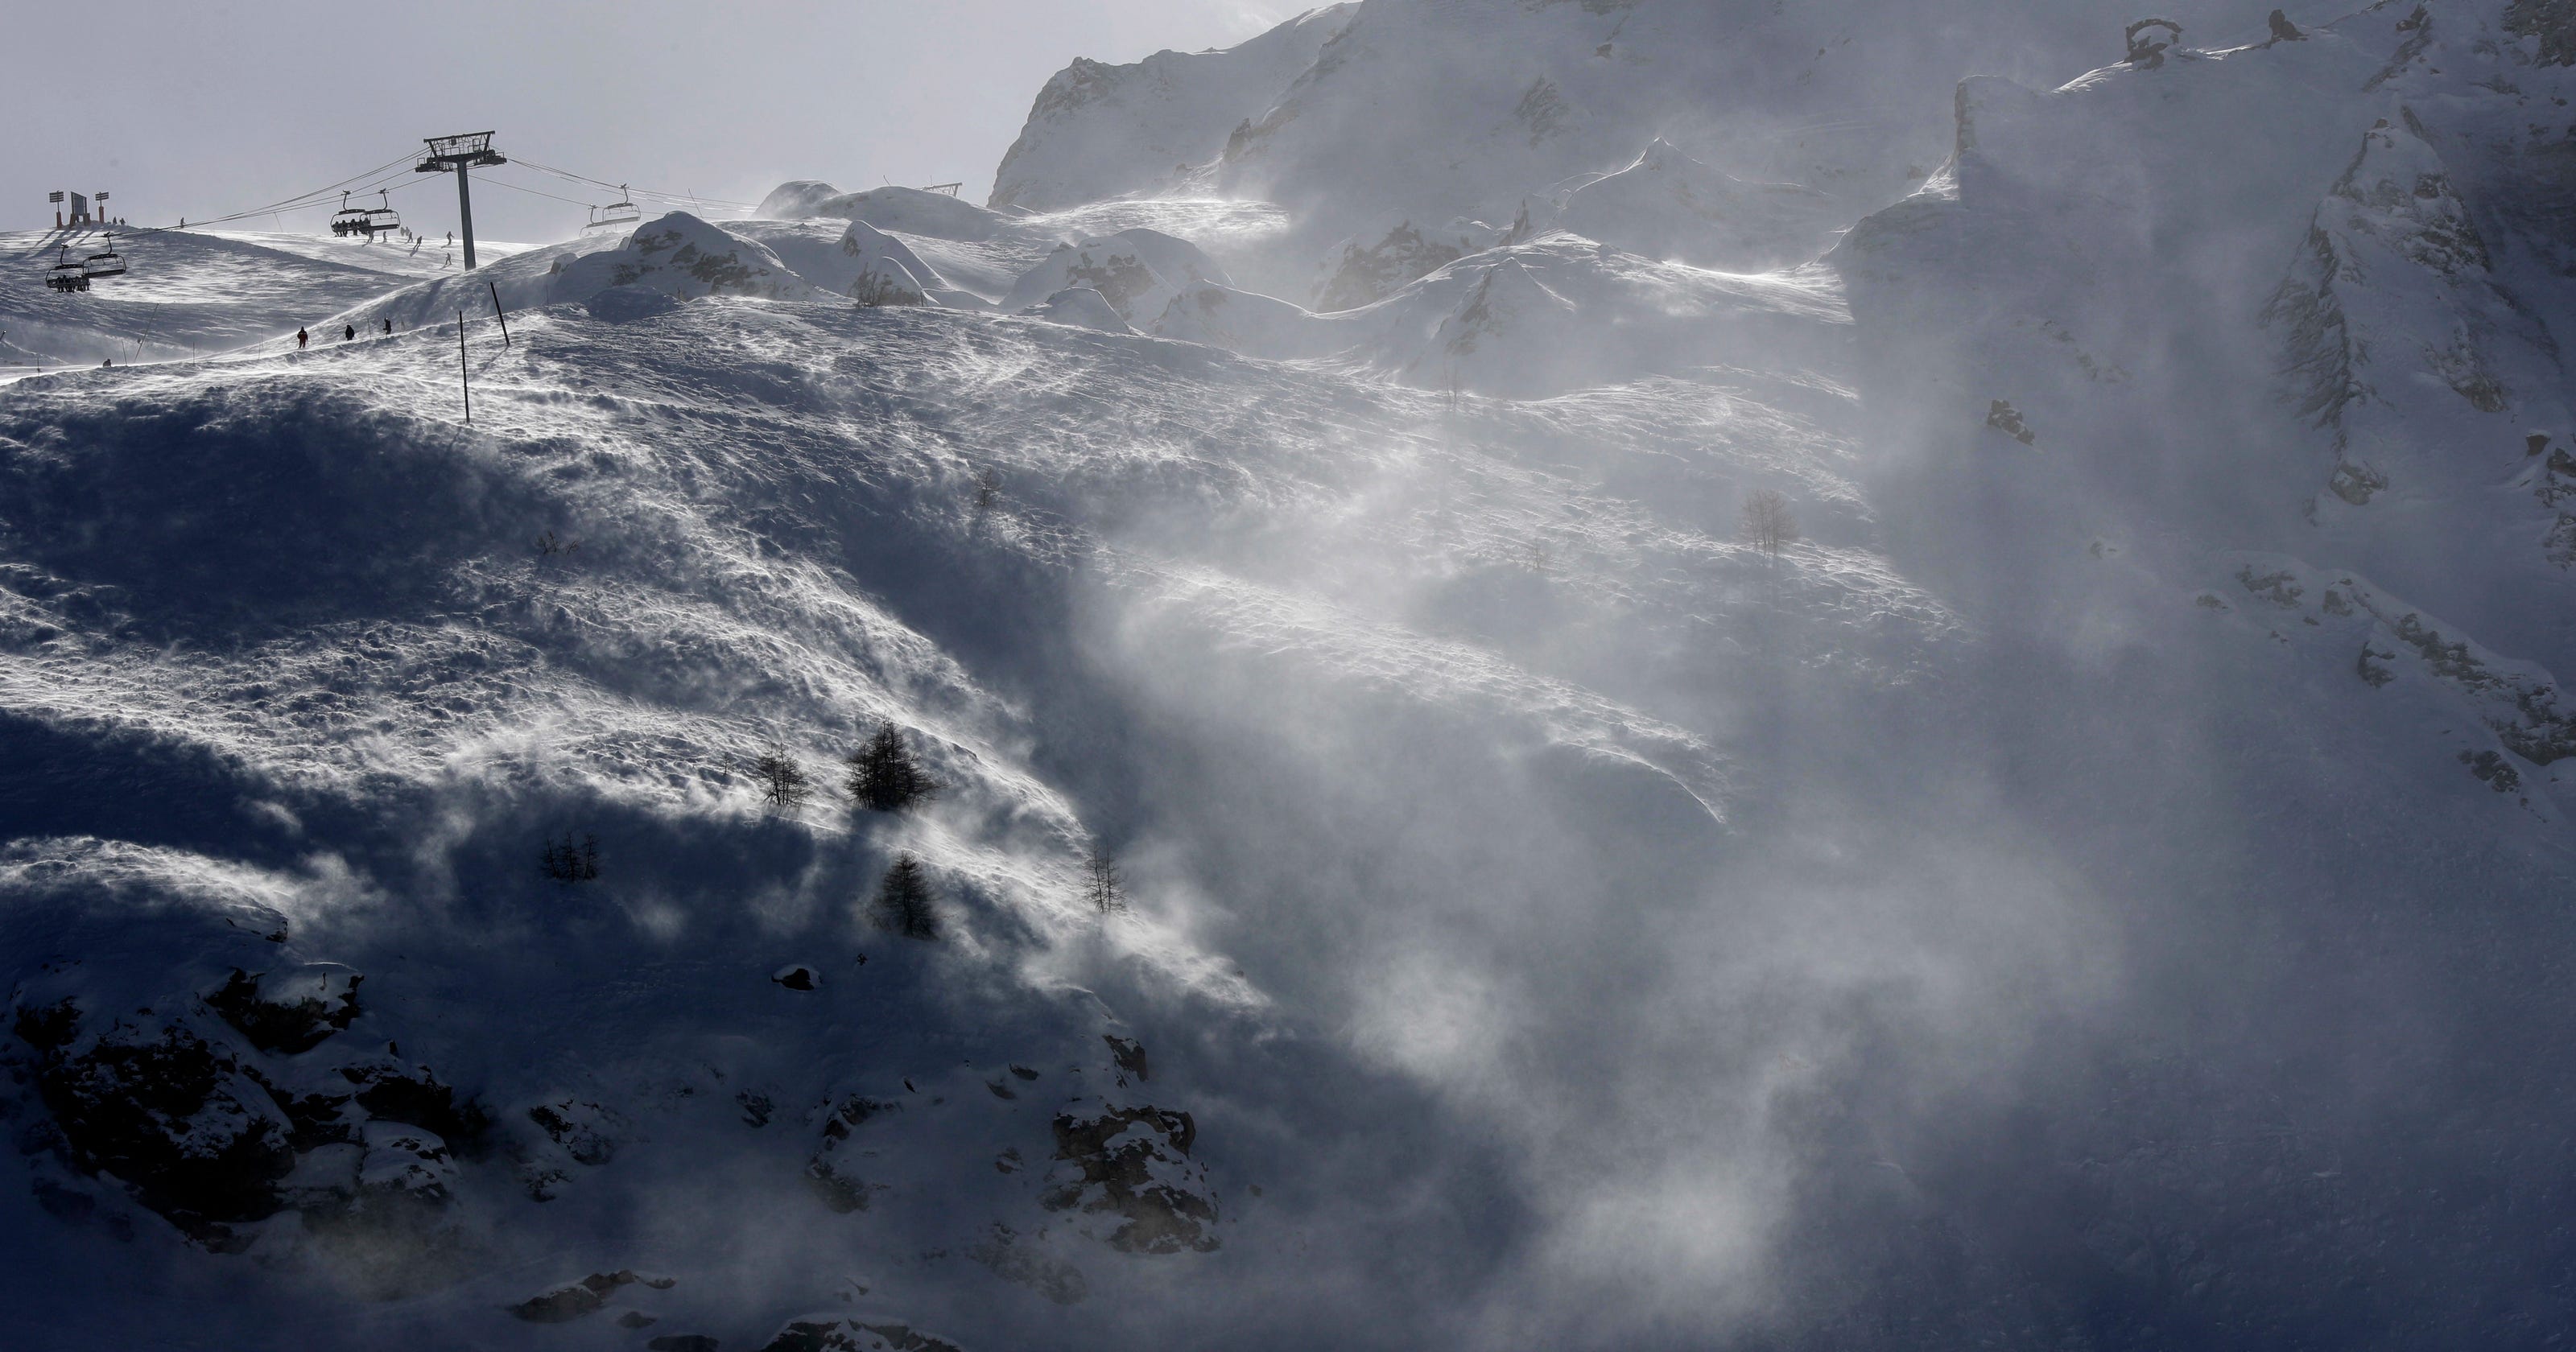 Snowboarder Dies 2 Missing In Avalanche In France